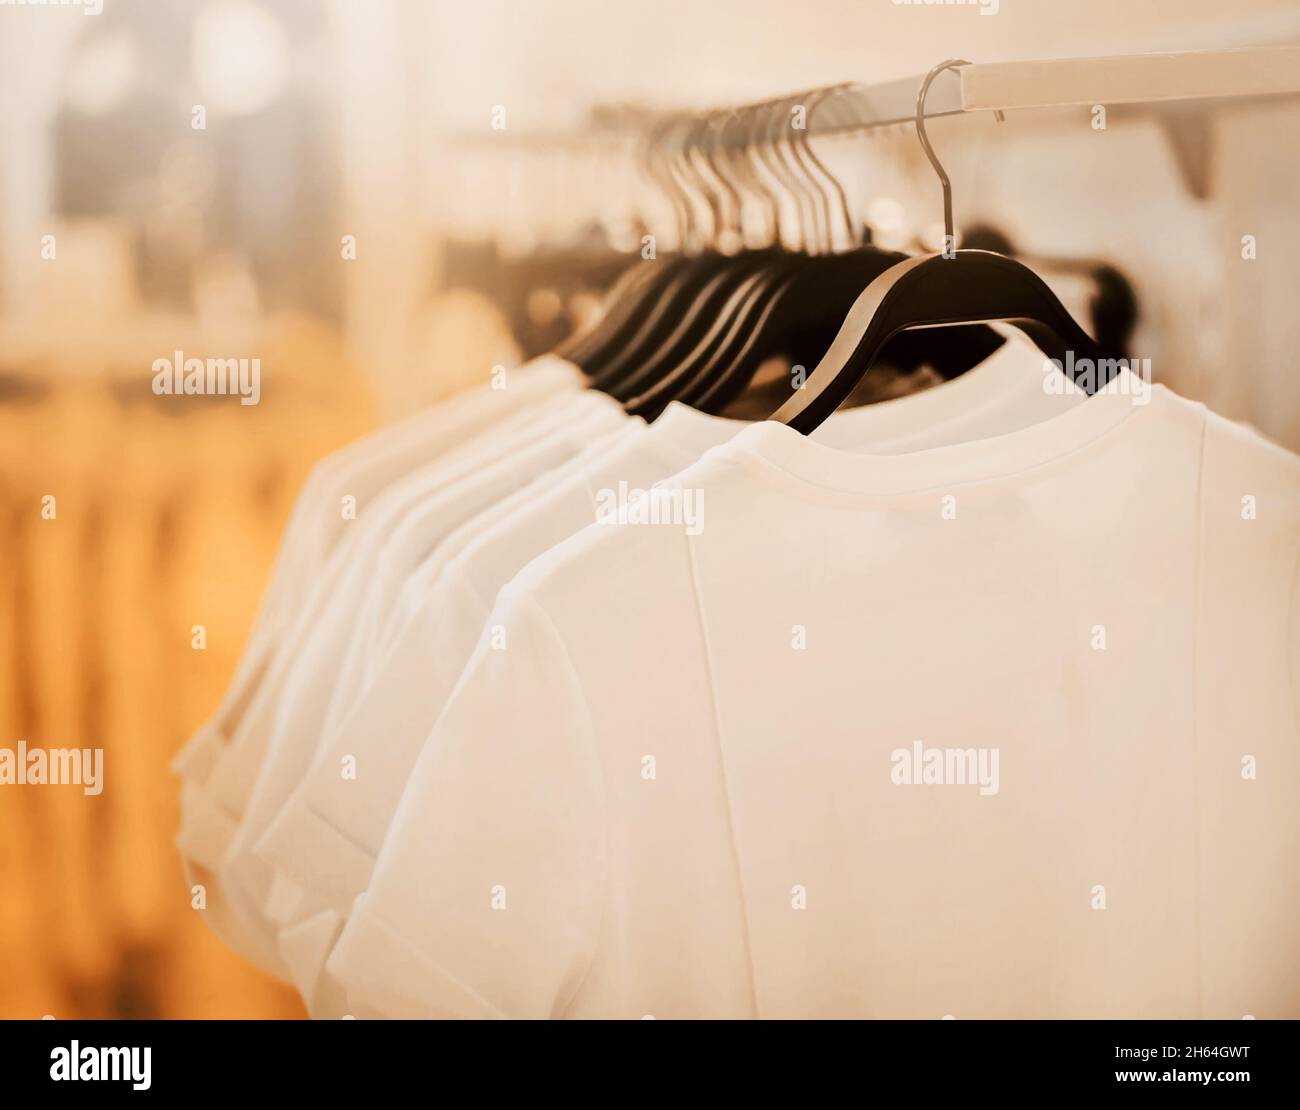 Basic casual white T-shirts hang on black hangers in a clothing store, illuminated by light. Shopping and sale. Comfortable clothes. Stock Photo